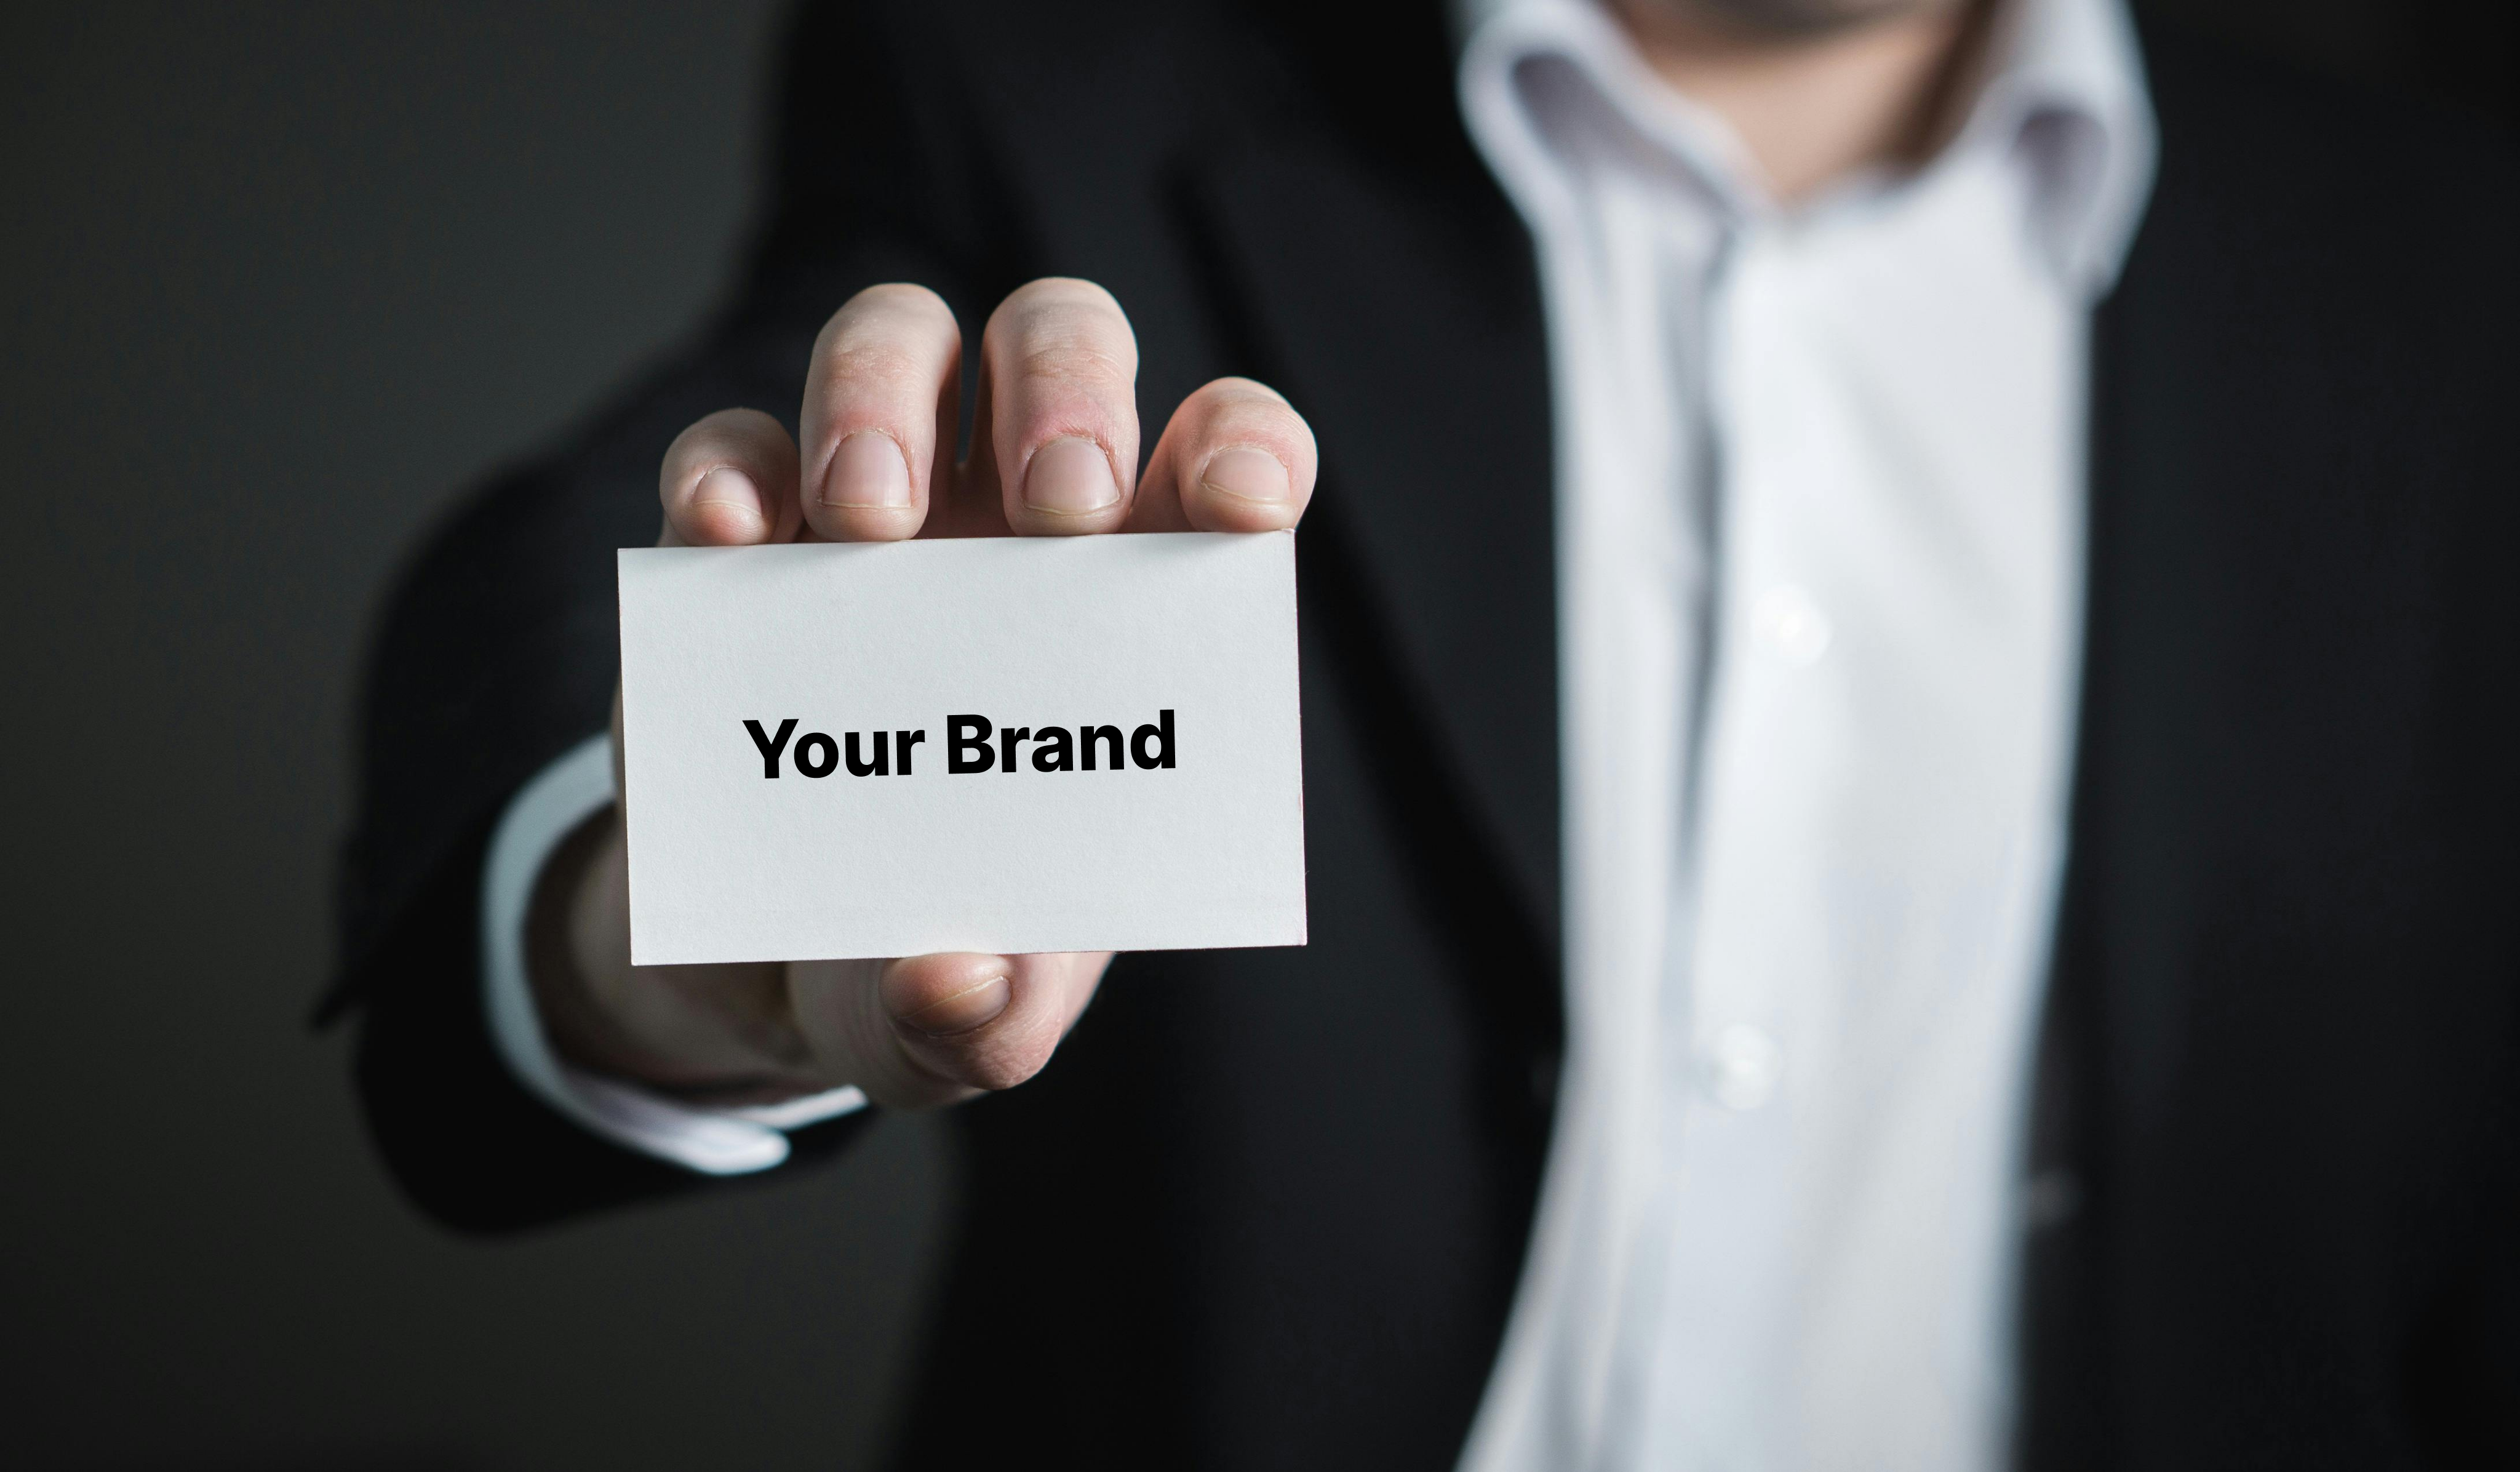 How do you create a good brand presence and how can design help?